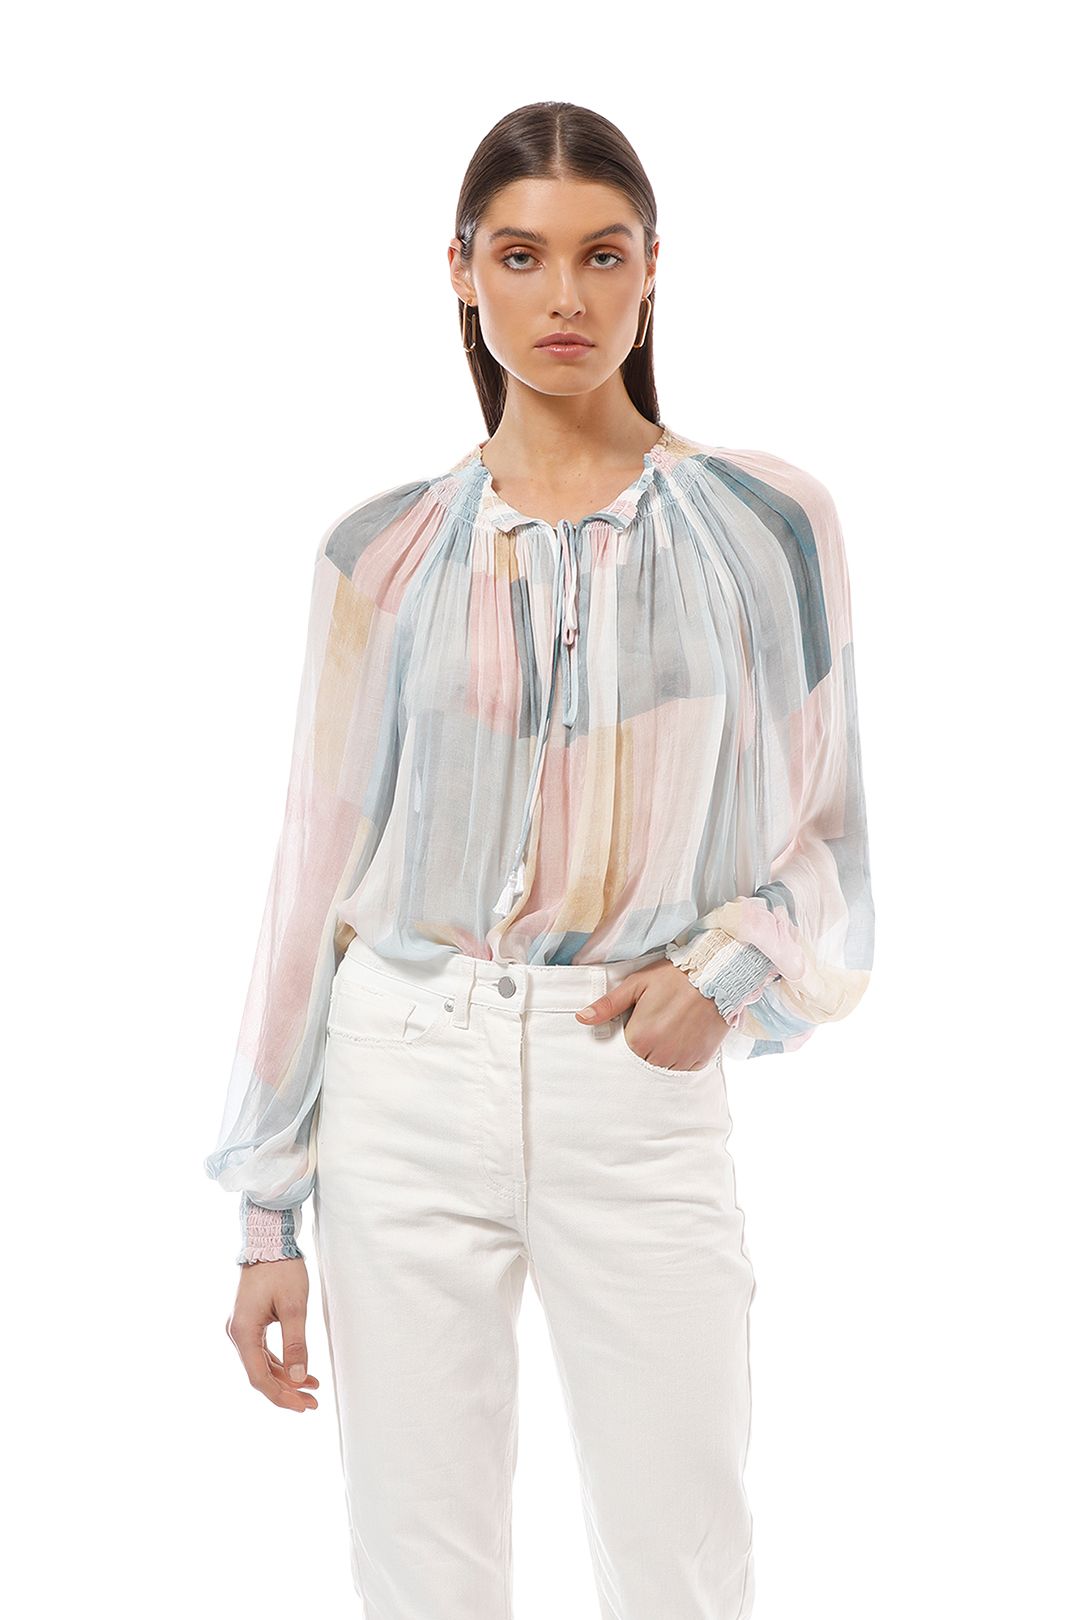 Ginger and Smart - Rapture Blouse - Watercolour Print - Front Crop